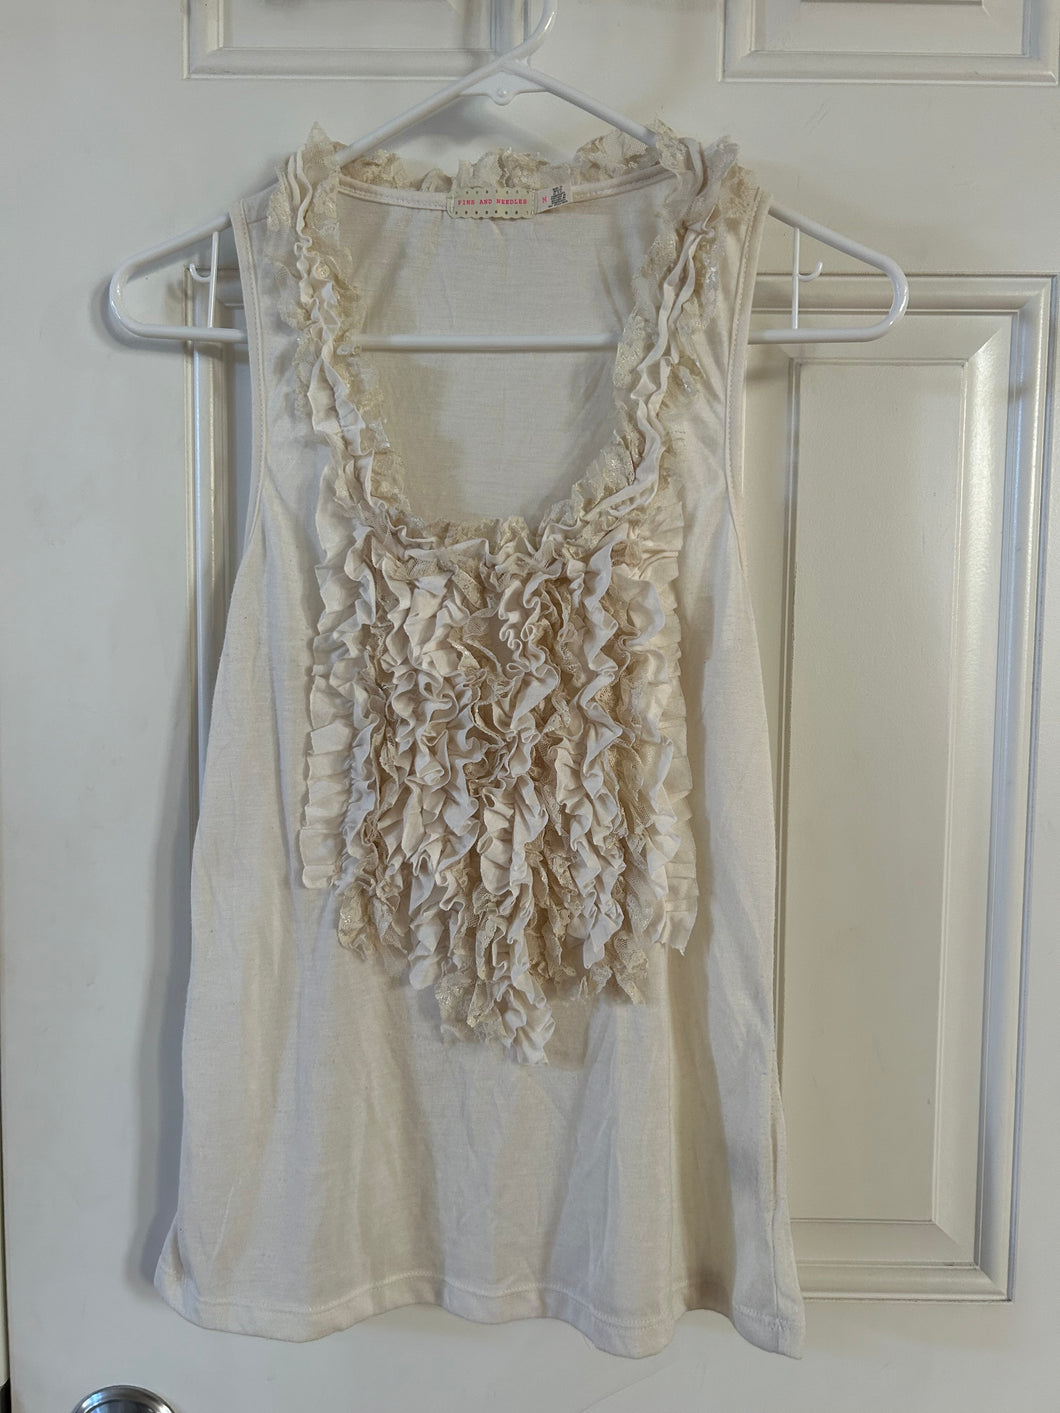 Pins and Needles brand - Cream, frilly front tank. Wear alone or under a cute blazer! Adult Medium